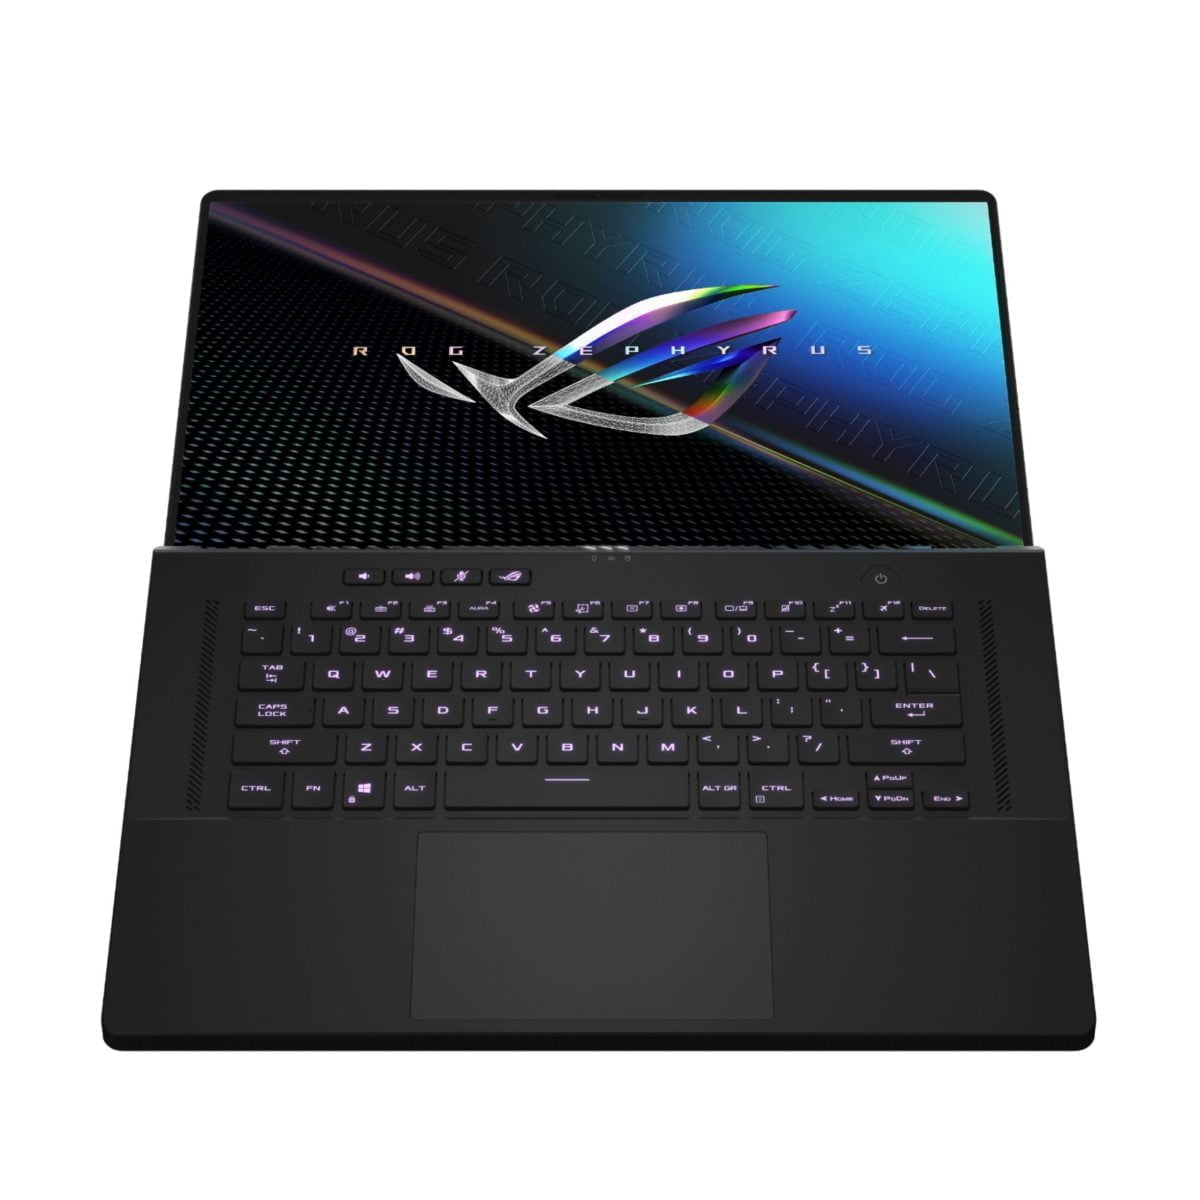 6464203Cv11D Asus &Lt;H1 Class=&Quot;Heading-5 V-Fw-Regular&Quot;&Gt;Asus - Rog 16&Quot; Wuxga 144Hz Gaming Laptop - Intel Core I7 - 16Gb Memory - Nvidia Rtx3050Ti - 512Gb Ssd&Lt;/H1&Gt; Asus Rog Gaming Laptop. Enjoy Everyday Gaming With This Asus Notebook Pc. The 11Th Gen Intel Core I7 Processor And 16Gb Of Ram Let You Run Graphics-Heavy Games Smoothly, While The Potent Nvidia Rtx3050Ti Graphics Produce High-Quality Visuals On The New Fast 16-Inch 144Hz Wuxga Display. This Asus Notebook Pc Has 512Gb Ssd That Shortens Load Times And Offers Ample Storage. Asus Rog Gaming Laptop Asus - Rog 16&Quot; Wuxga 144Hz Gaming Laptop - Intel Core I7 - 16Gb Memory - Nvidia Rtx3050Ti - 512Gb Ssd